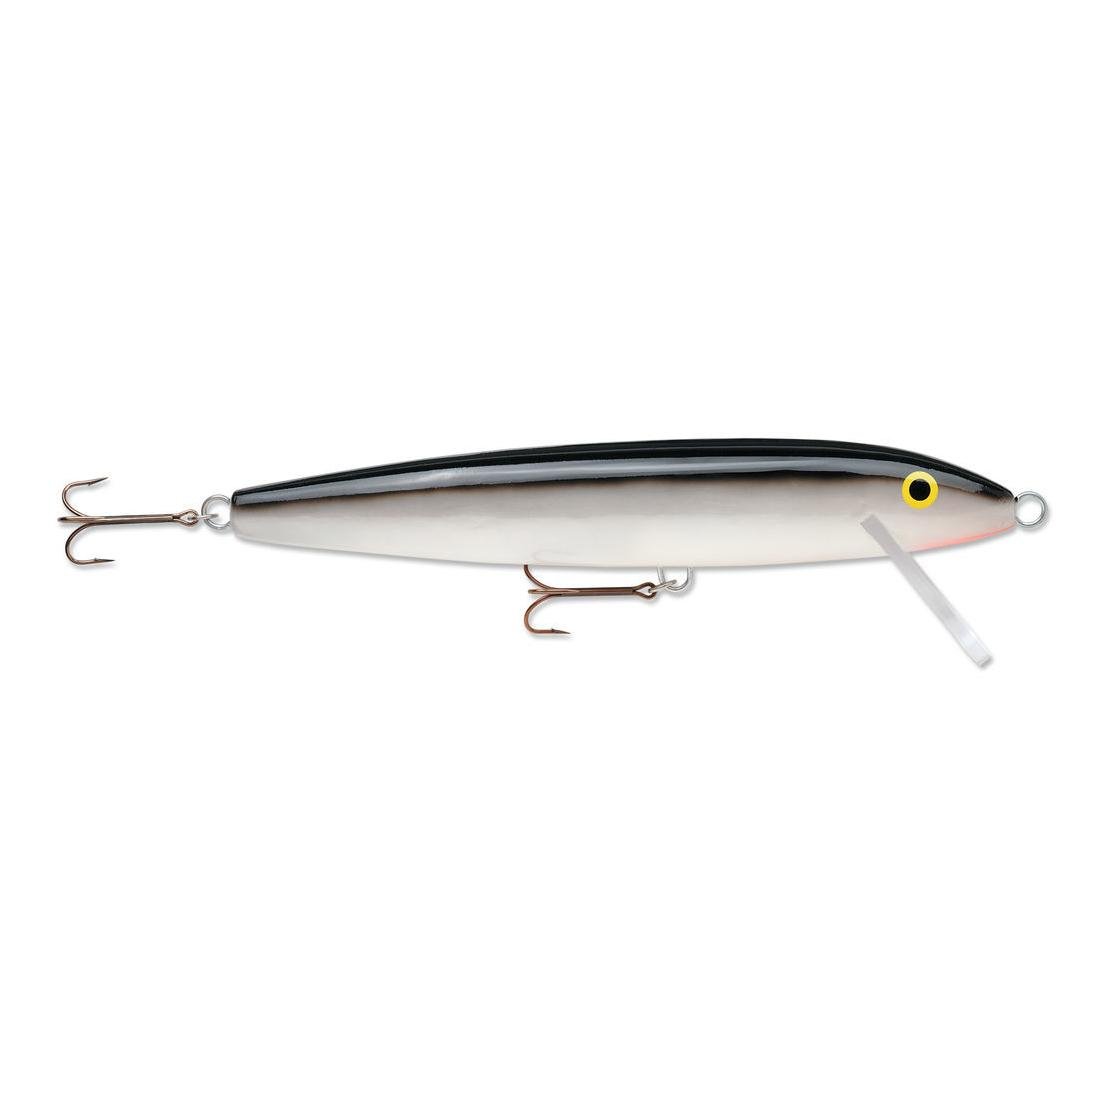 Image of Rapala 29" Giant Lure Silver Black bei fischen.ch